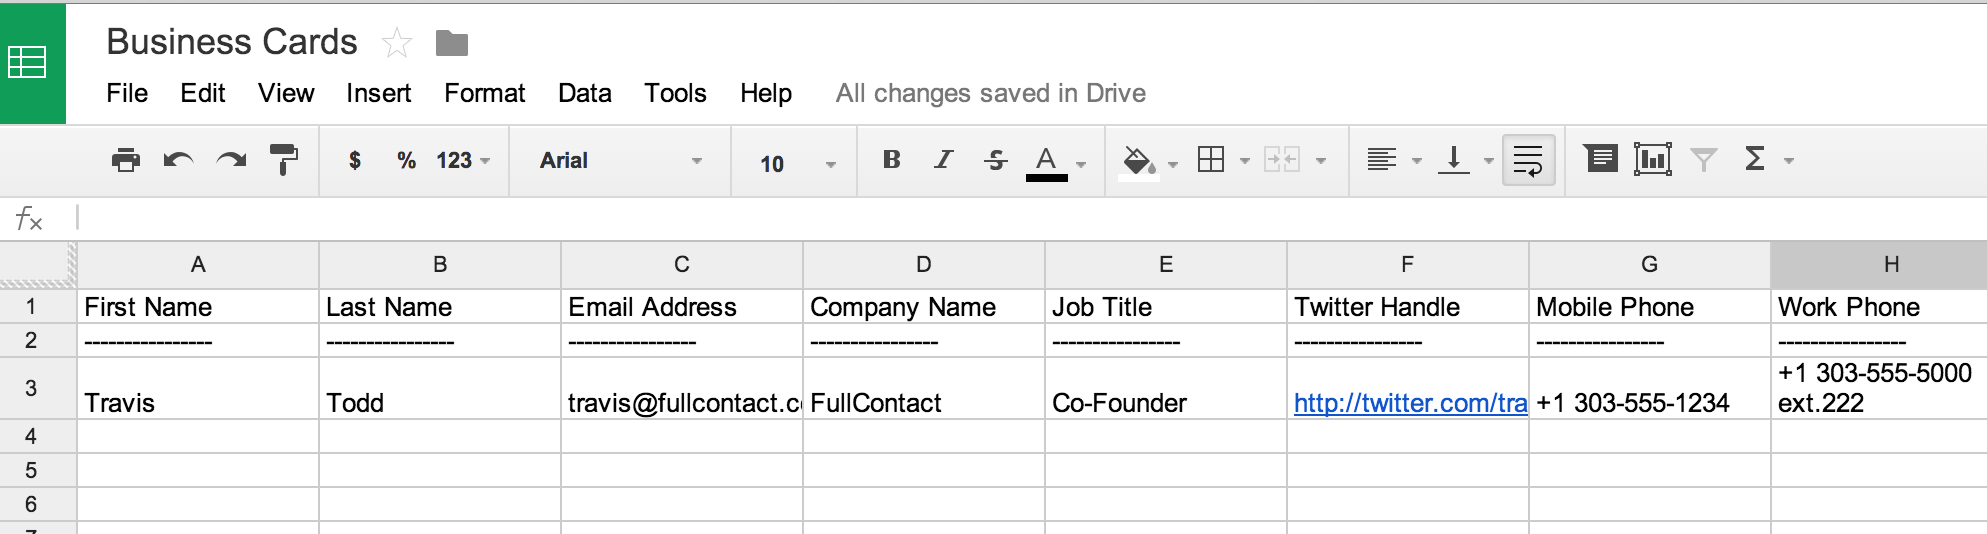 Scan Business Cards Into Excel Spreadsheet In How To Scan Business Cards Into A Spreadsheet